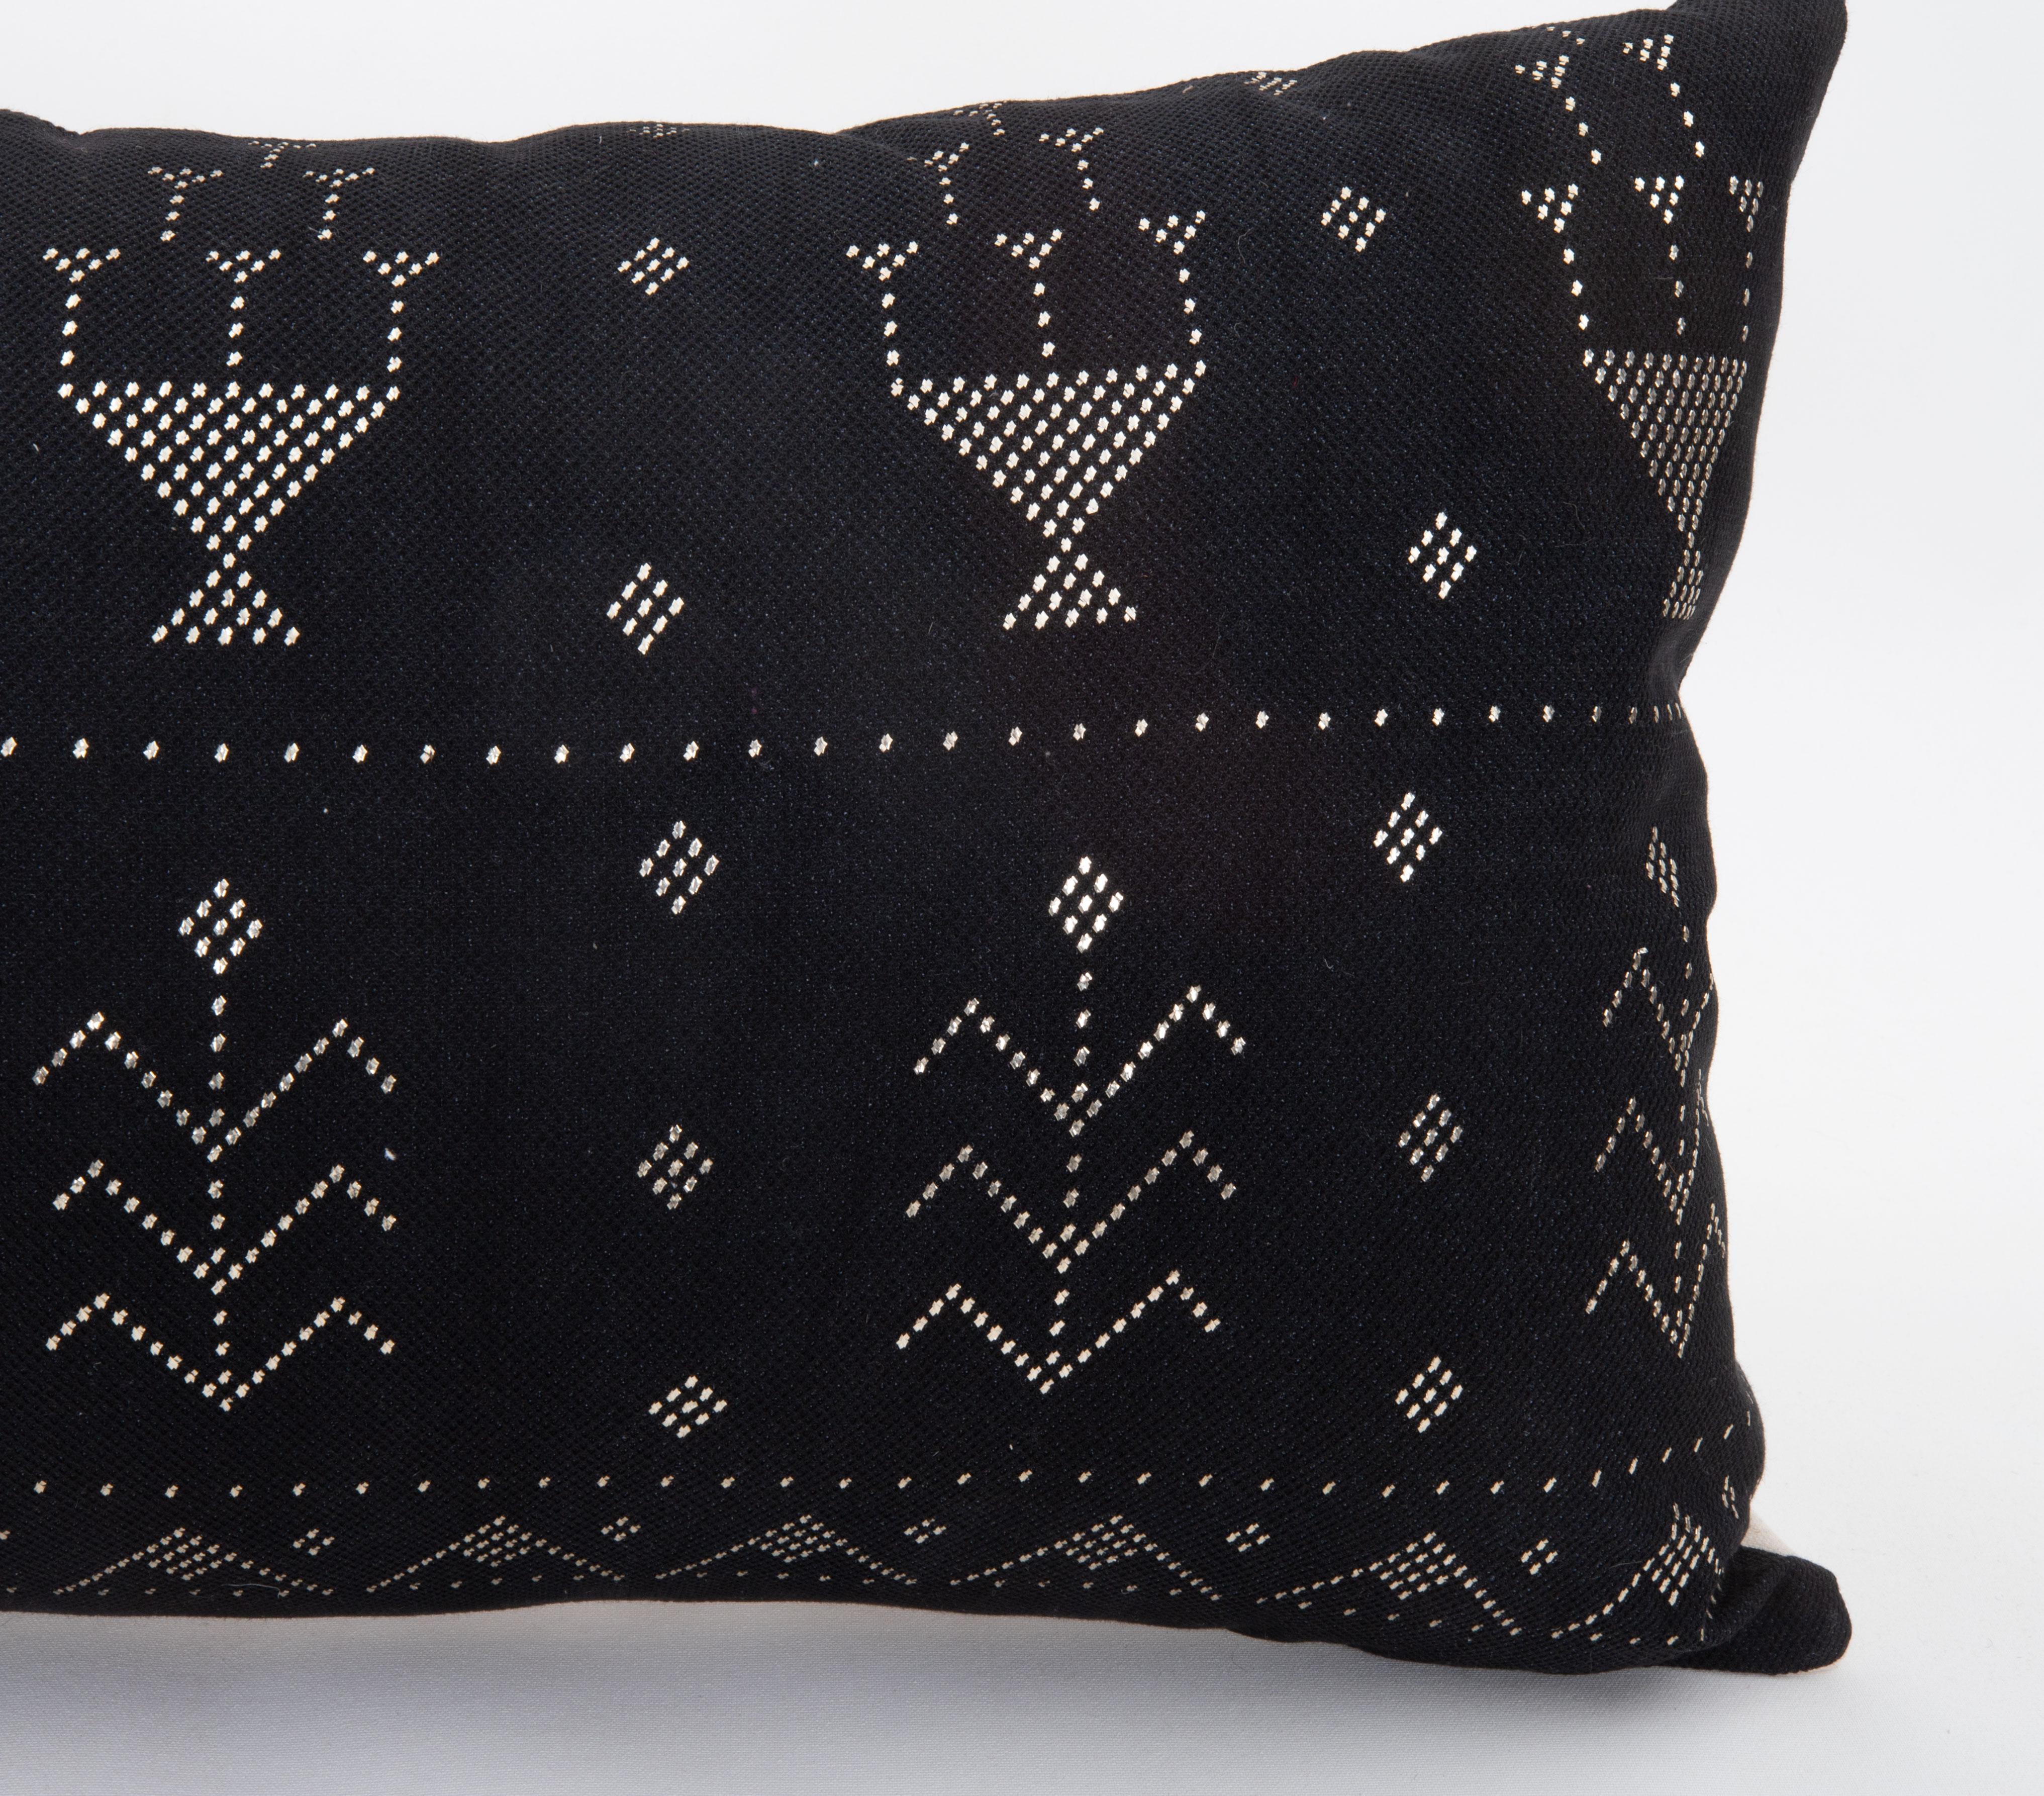 Metallic Thread Pillow Cover Fashioned from  Vintage Egyptian ‘tulli bi telli’, Assuit Textile For Sale